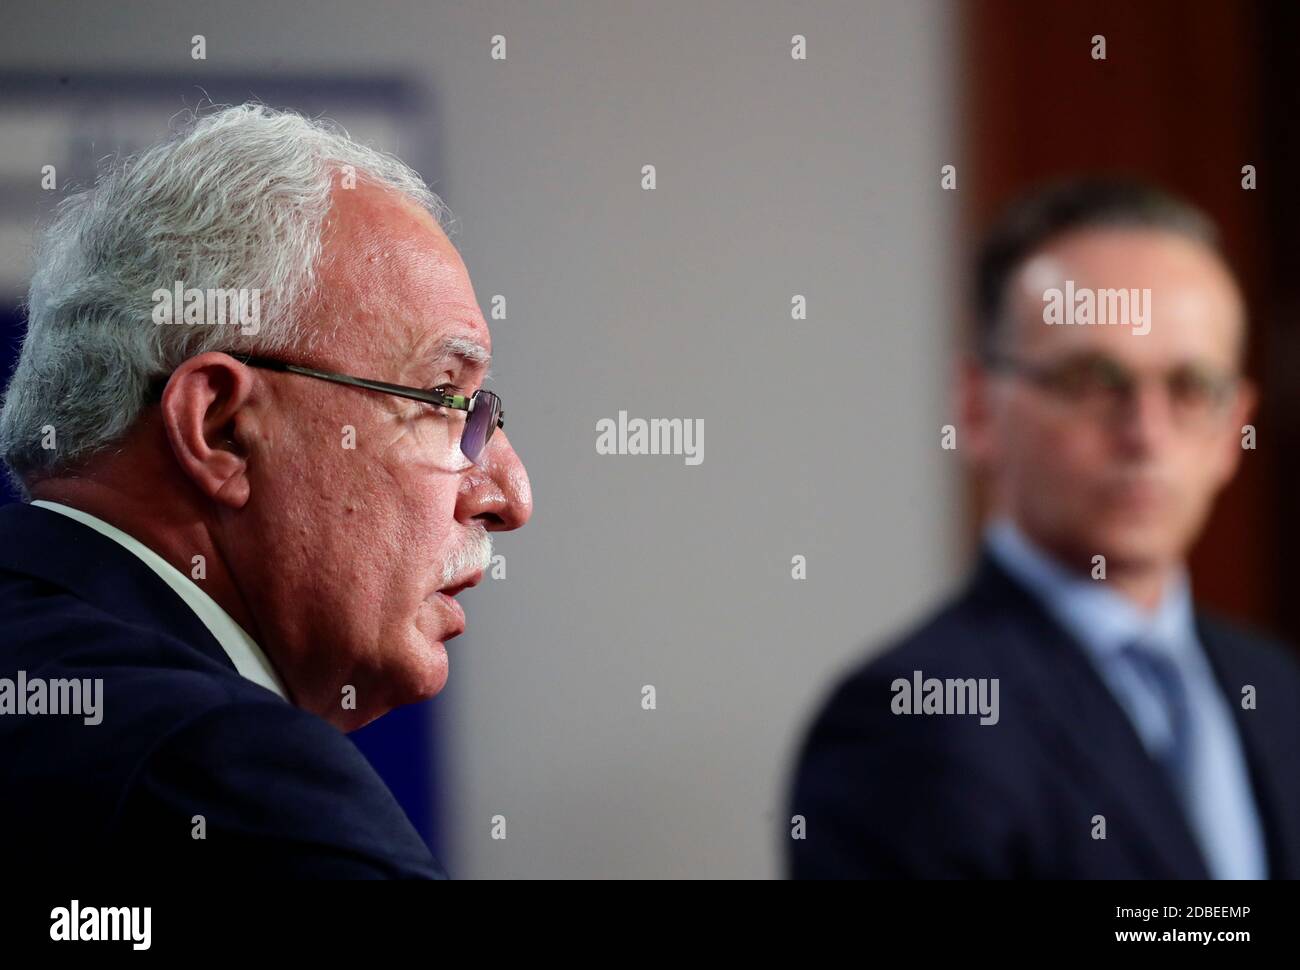 Berlin, Germany. 17th Nov, 2020. Heiko Maas (SPD, r), Foreign Minister, gives a joint press conference with his Palestinian counterpart Riad al-Maliki. Credit: Hannibal Hanschke/Reuters Images Europe/Pool/dpa/Alamy Live News Stock Photo